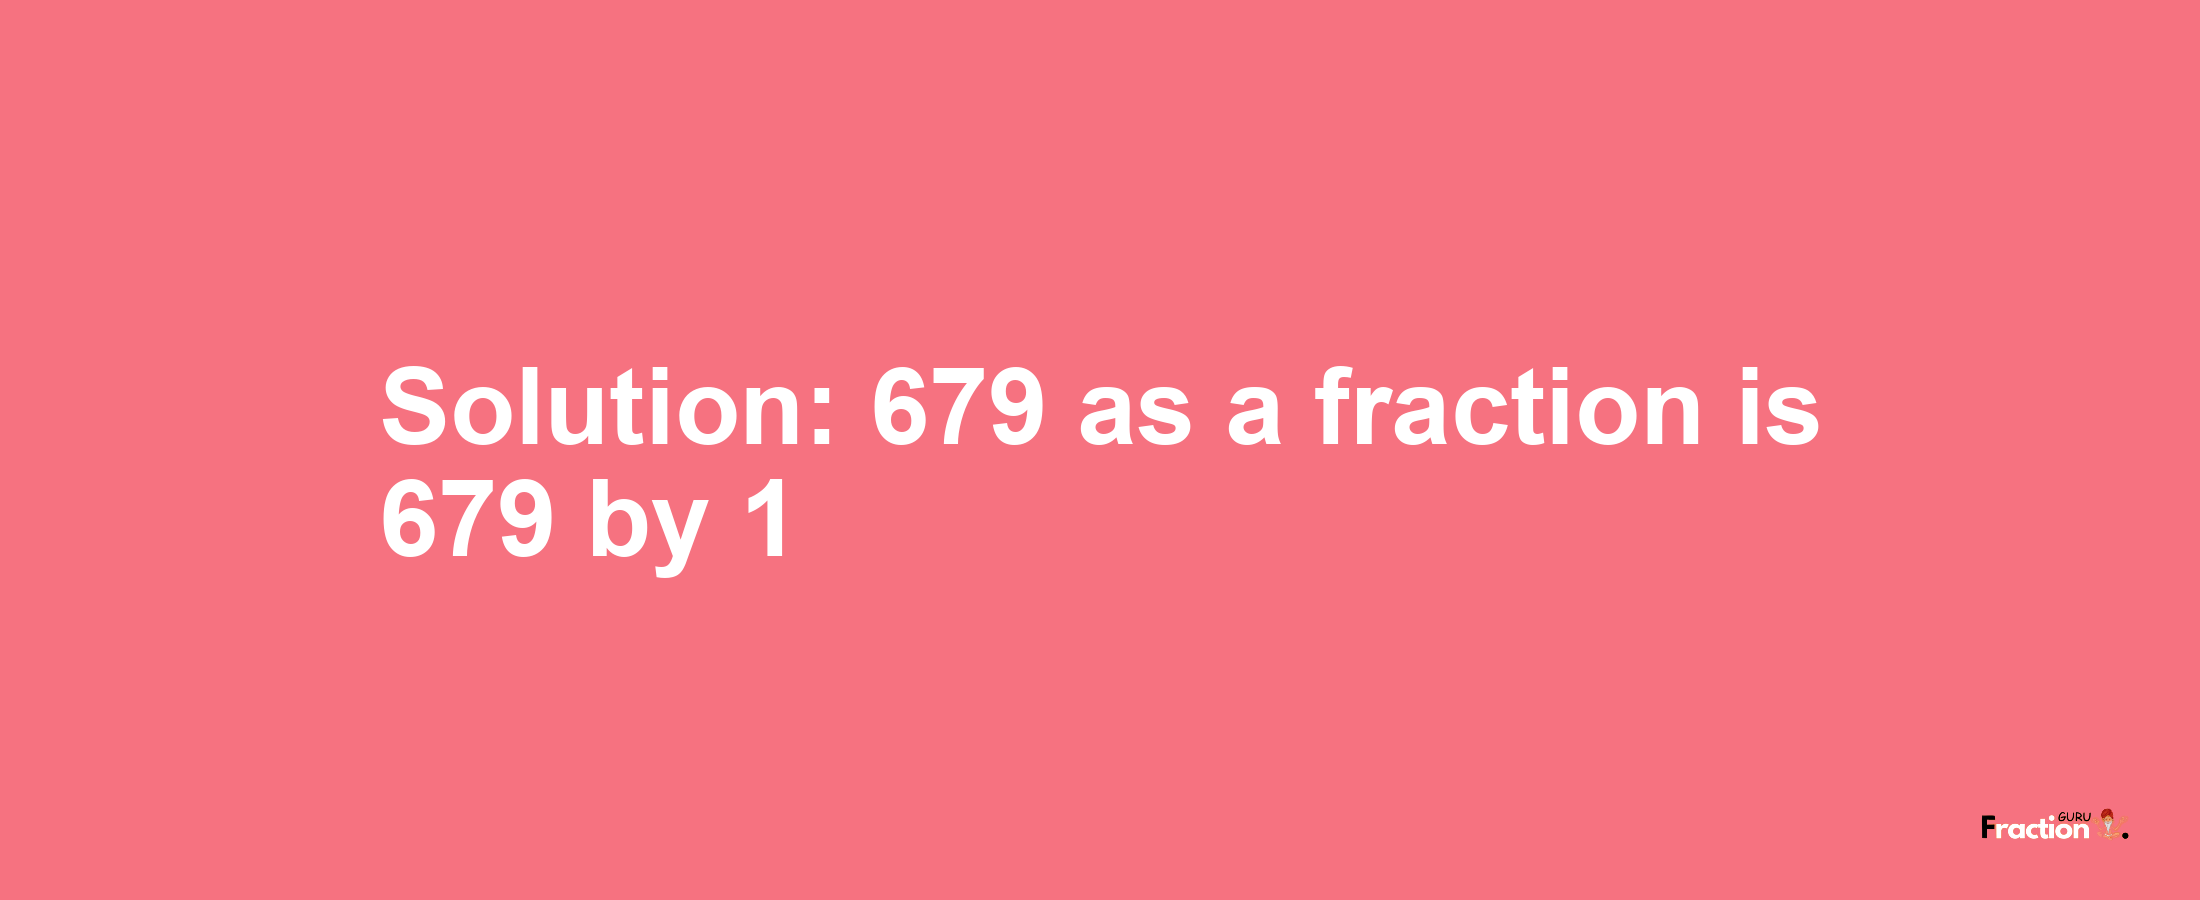 Solution:679 as a fraction is 679/1